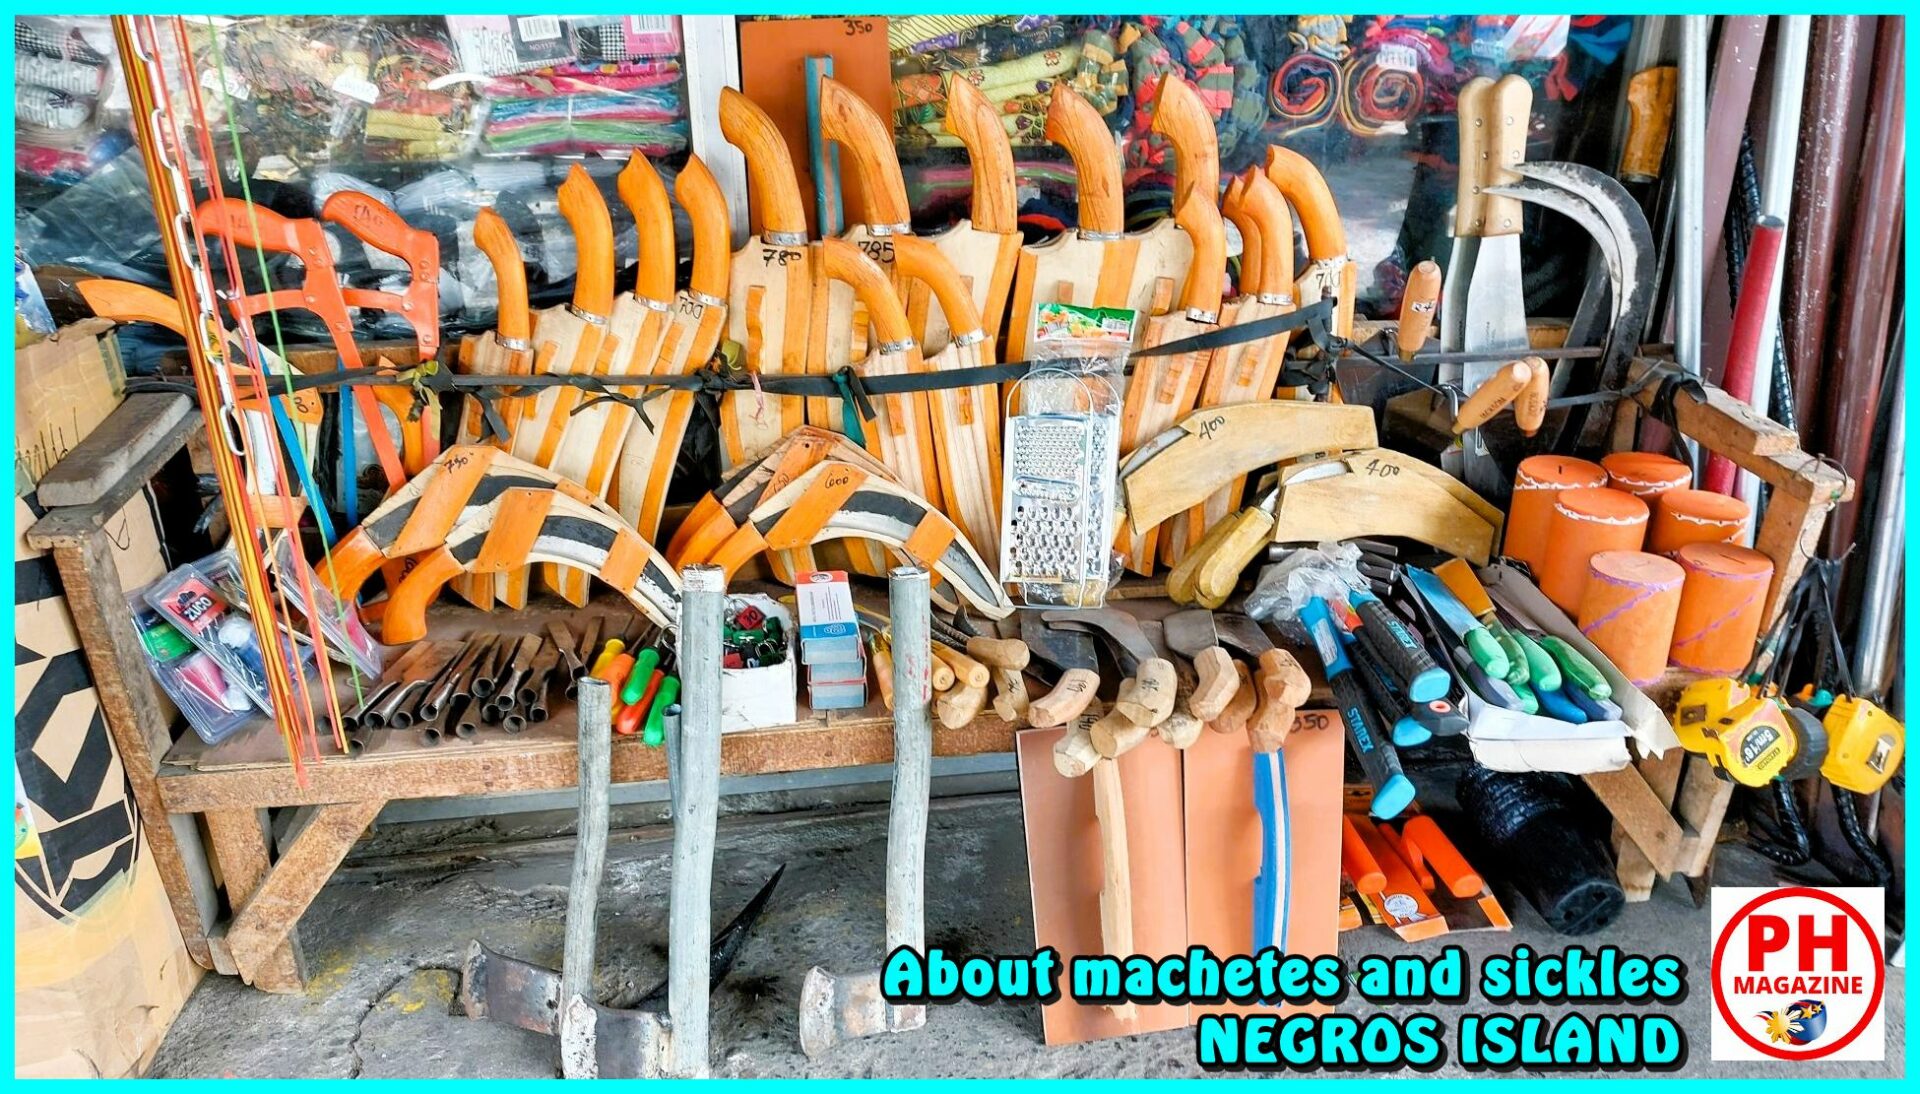 SIGHTS OF NEGROS - PHOTO OF THE DAY - About machetes and sickles